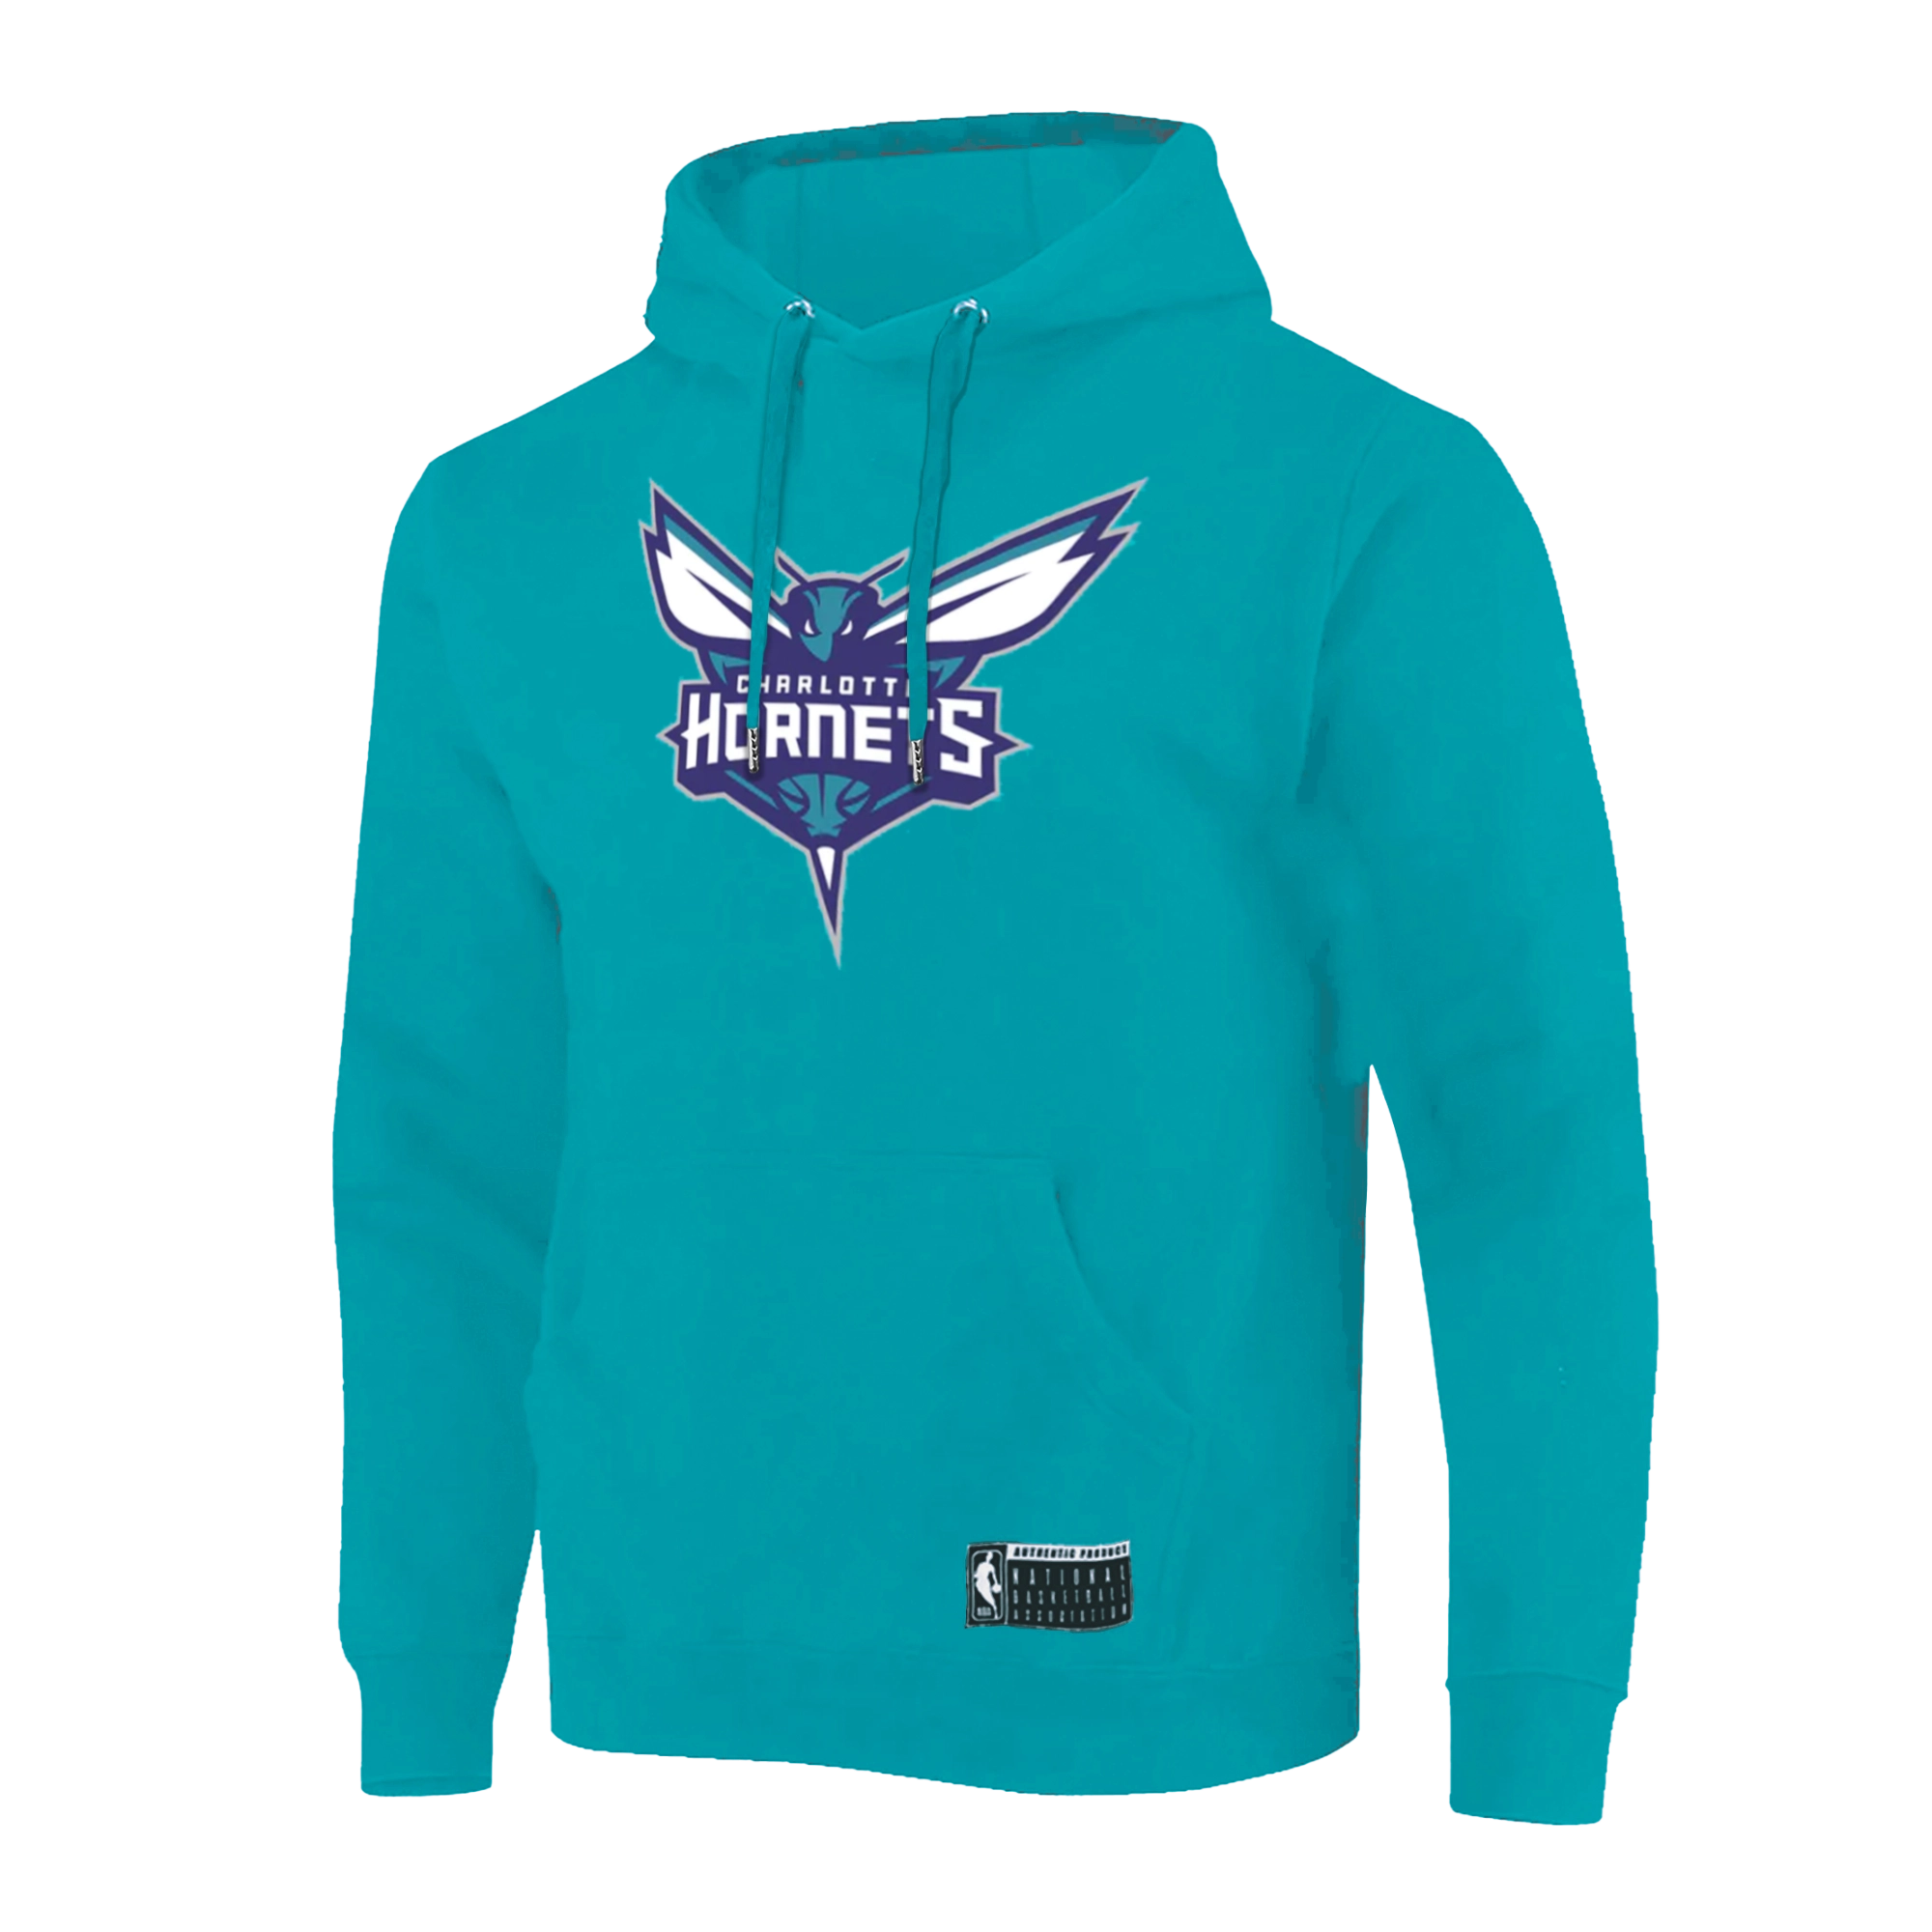 Do any rep sellers sell these NBA warm up hoodies or something similar? :  r/basketballjerseys